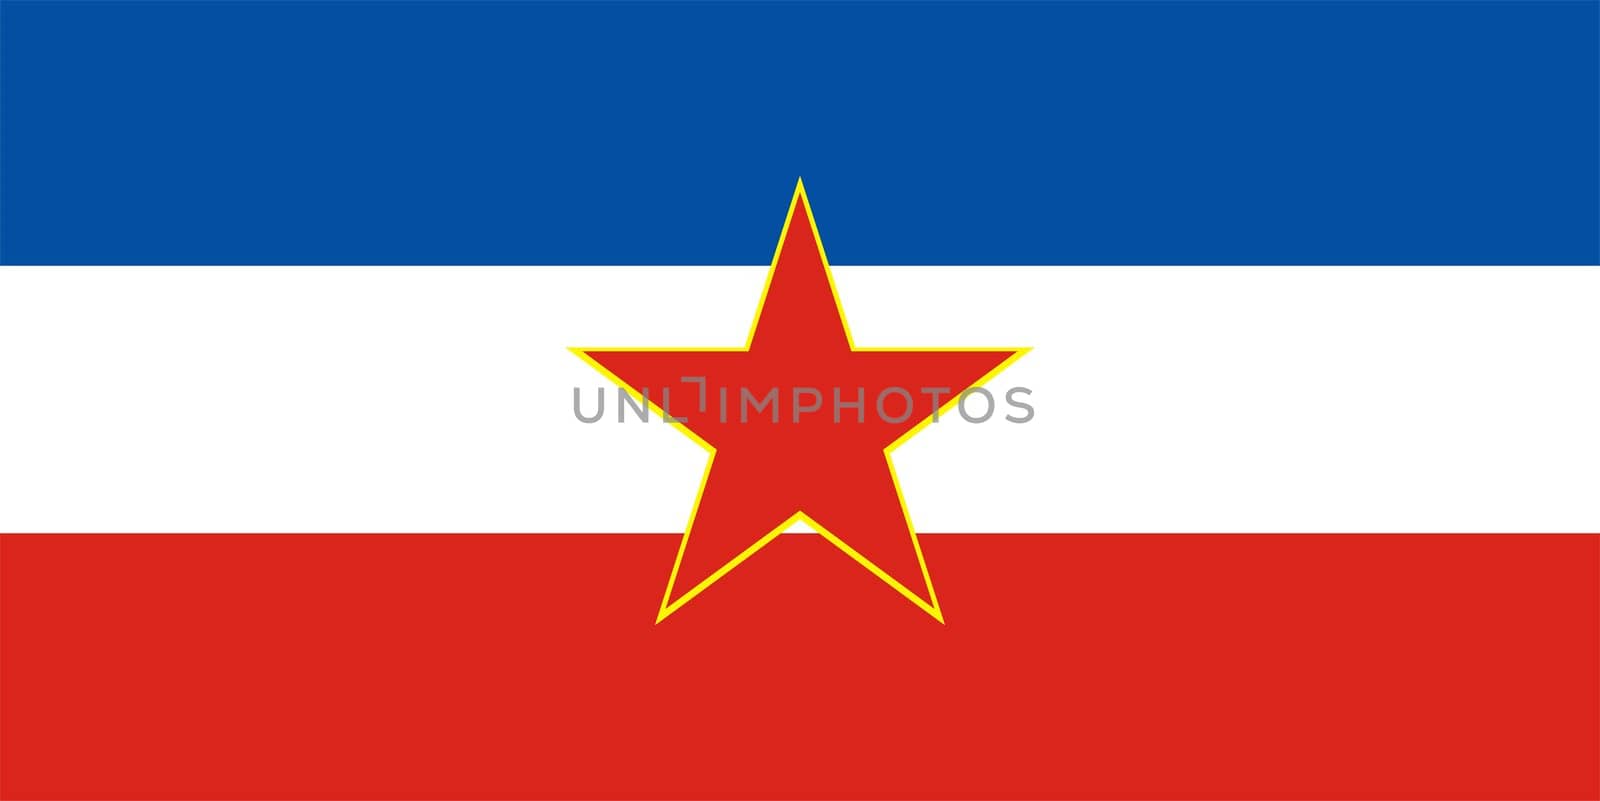 This is Yugoslavia flag illustration computer generated.
